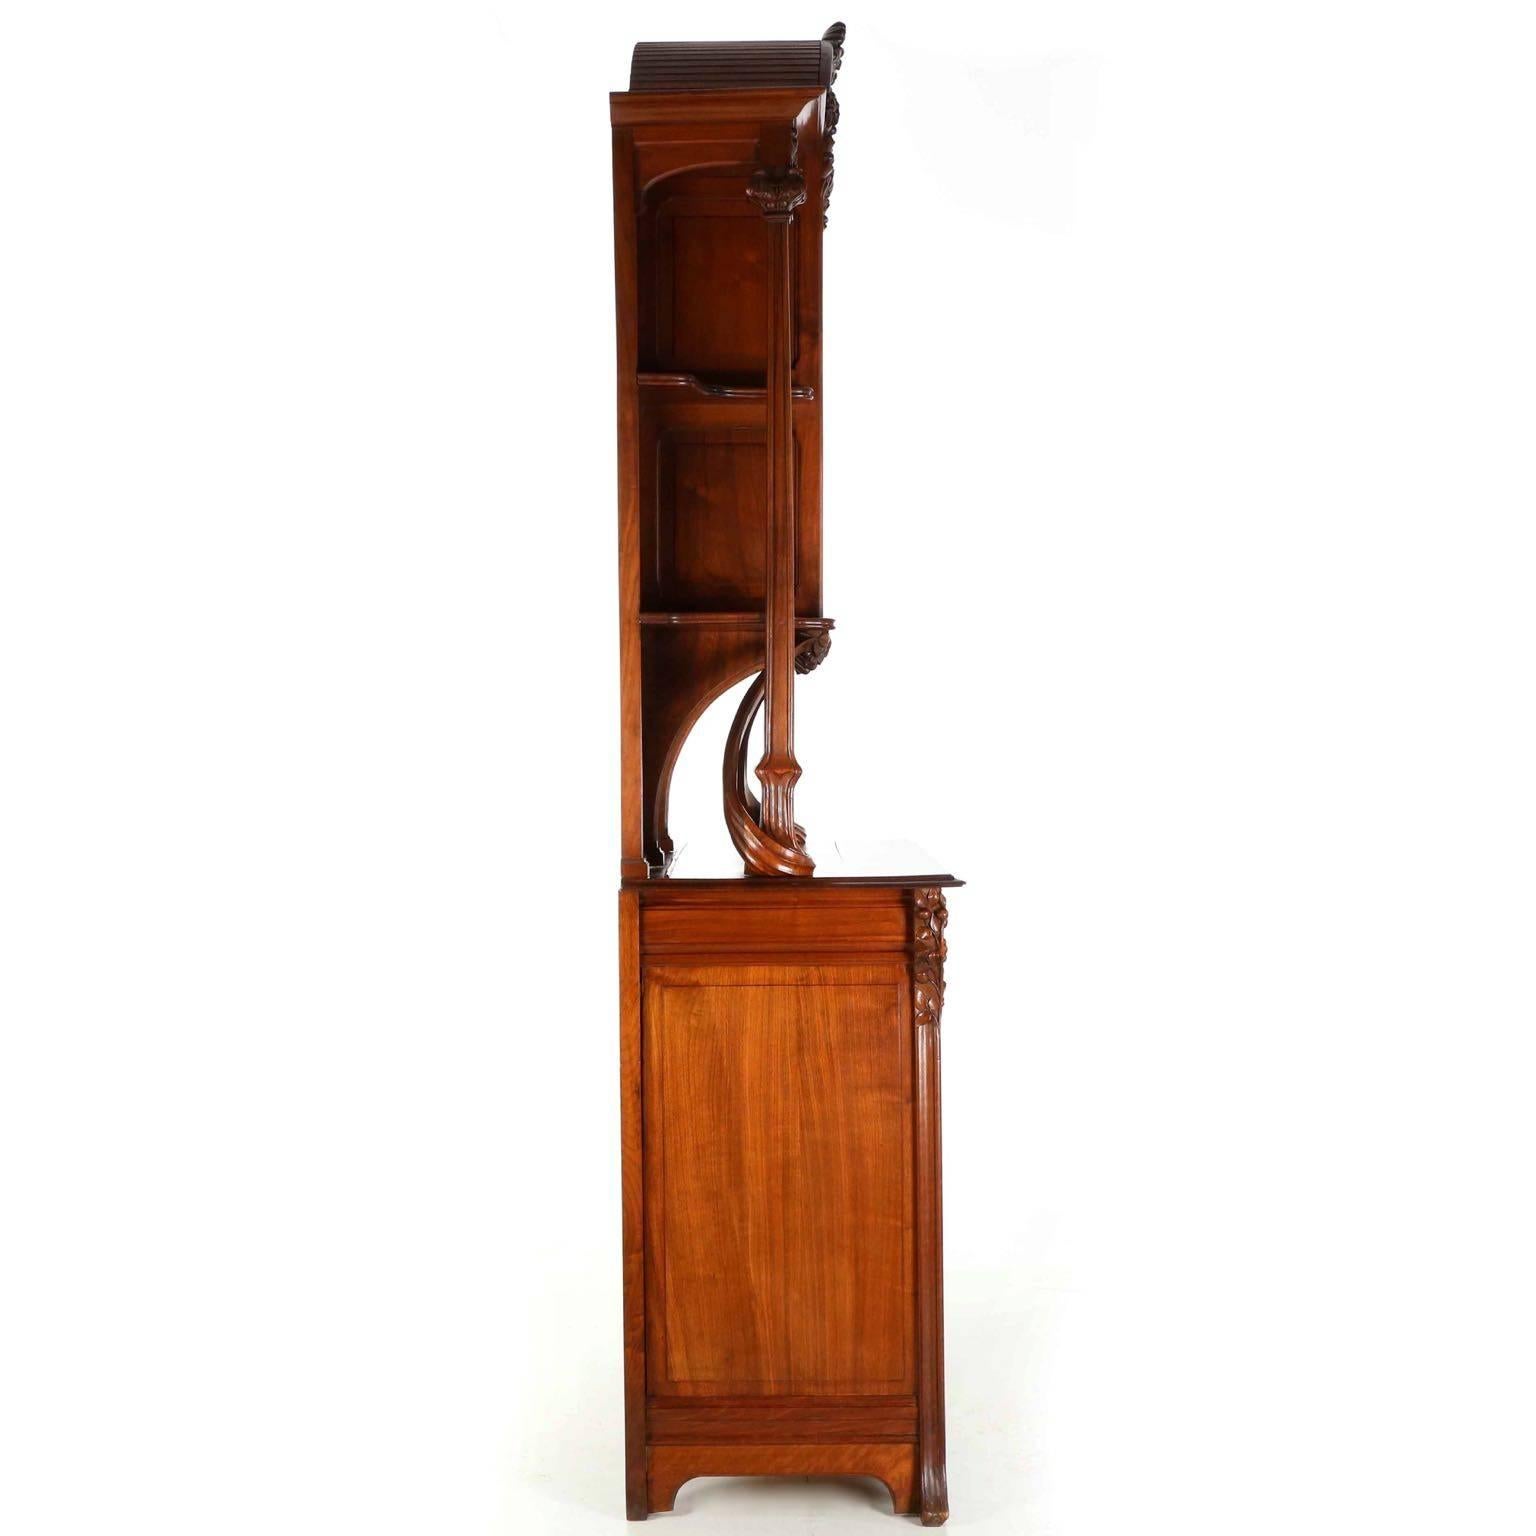 An incredible presentation work that captures the very essence of the naturalism of the period, this highly organic cabinet is crafted of gorgeous solid walnut primary woods carved ingeniously to incorporate the flowing roots and generous foliage,